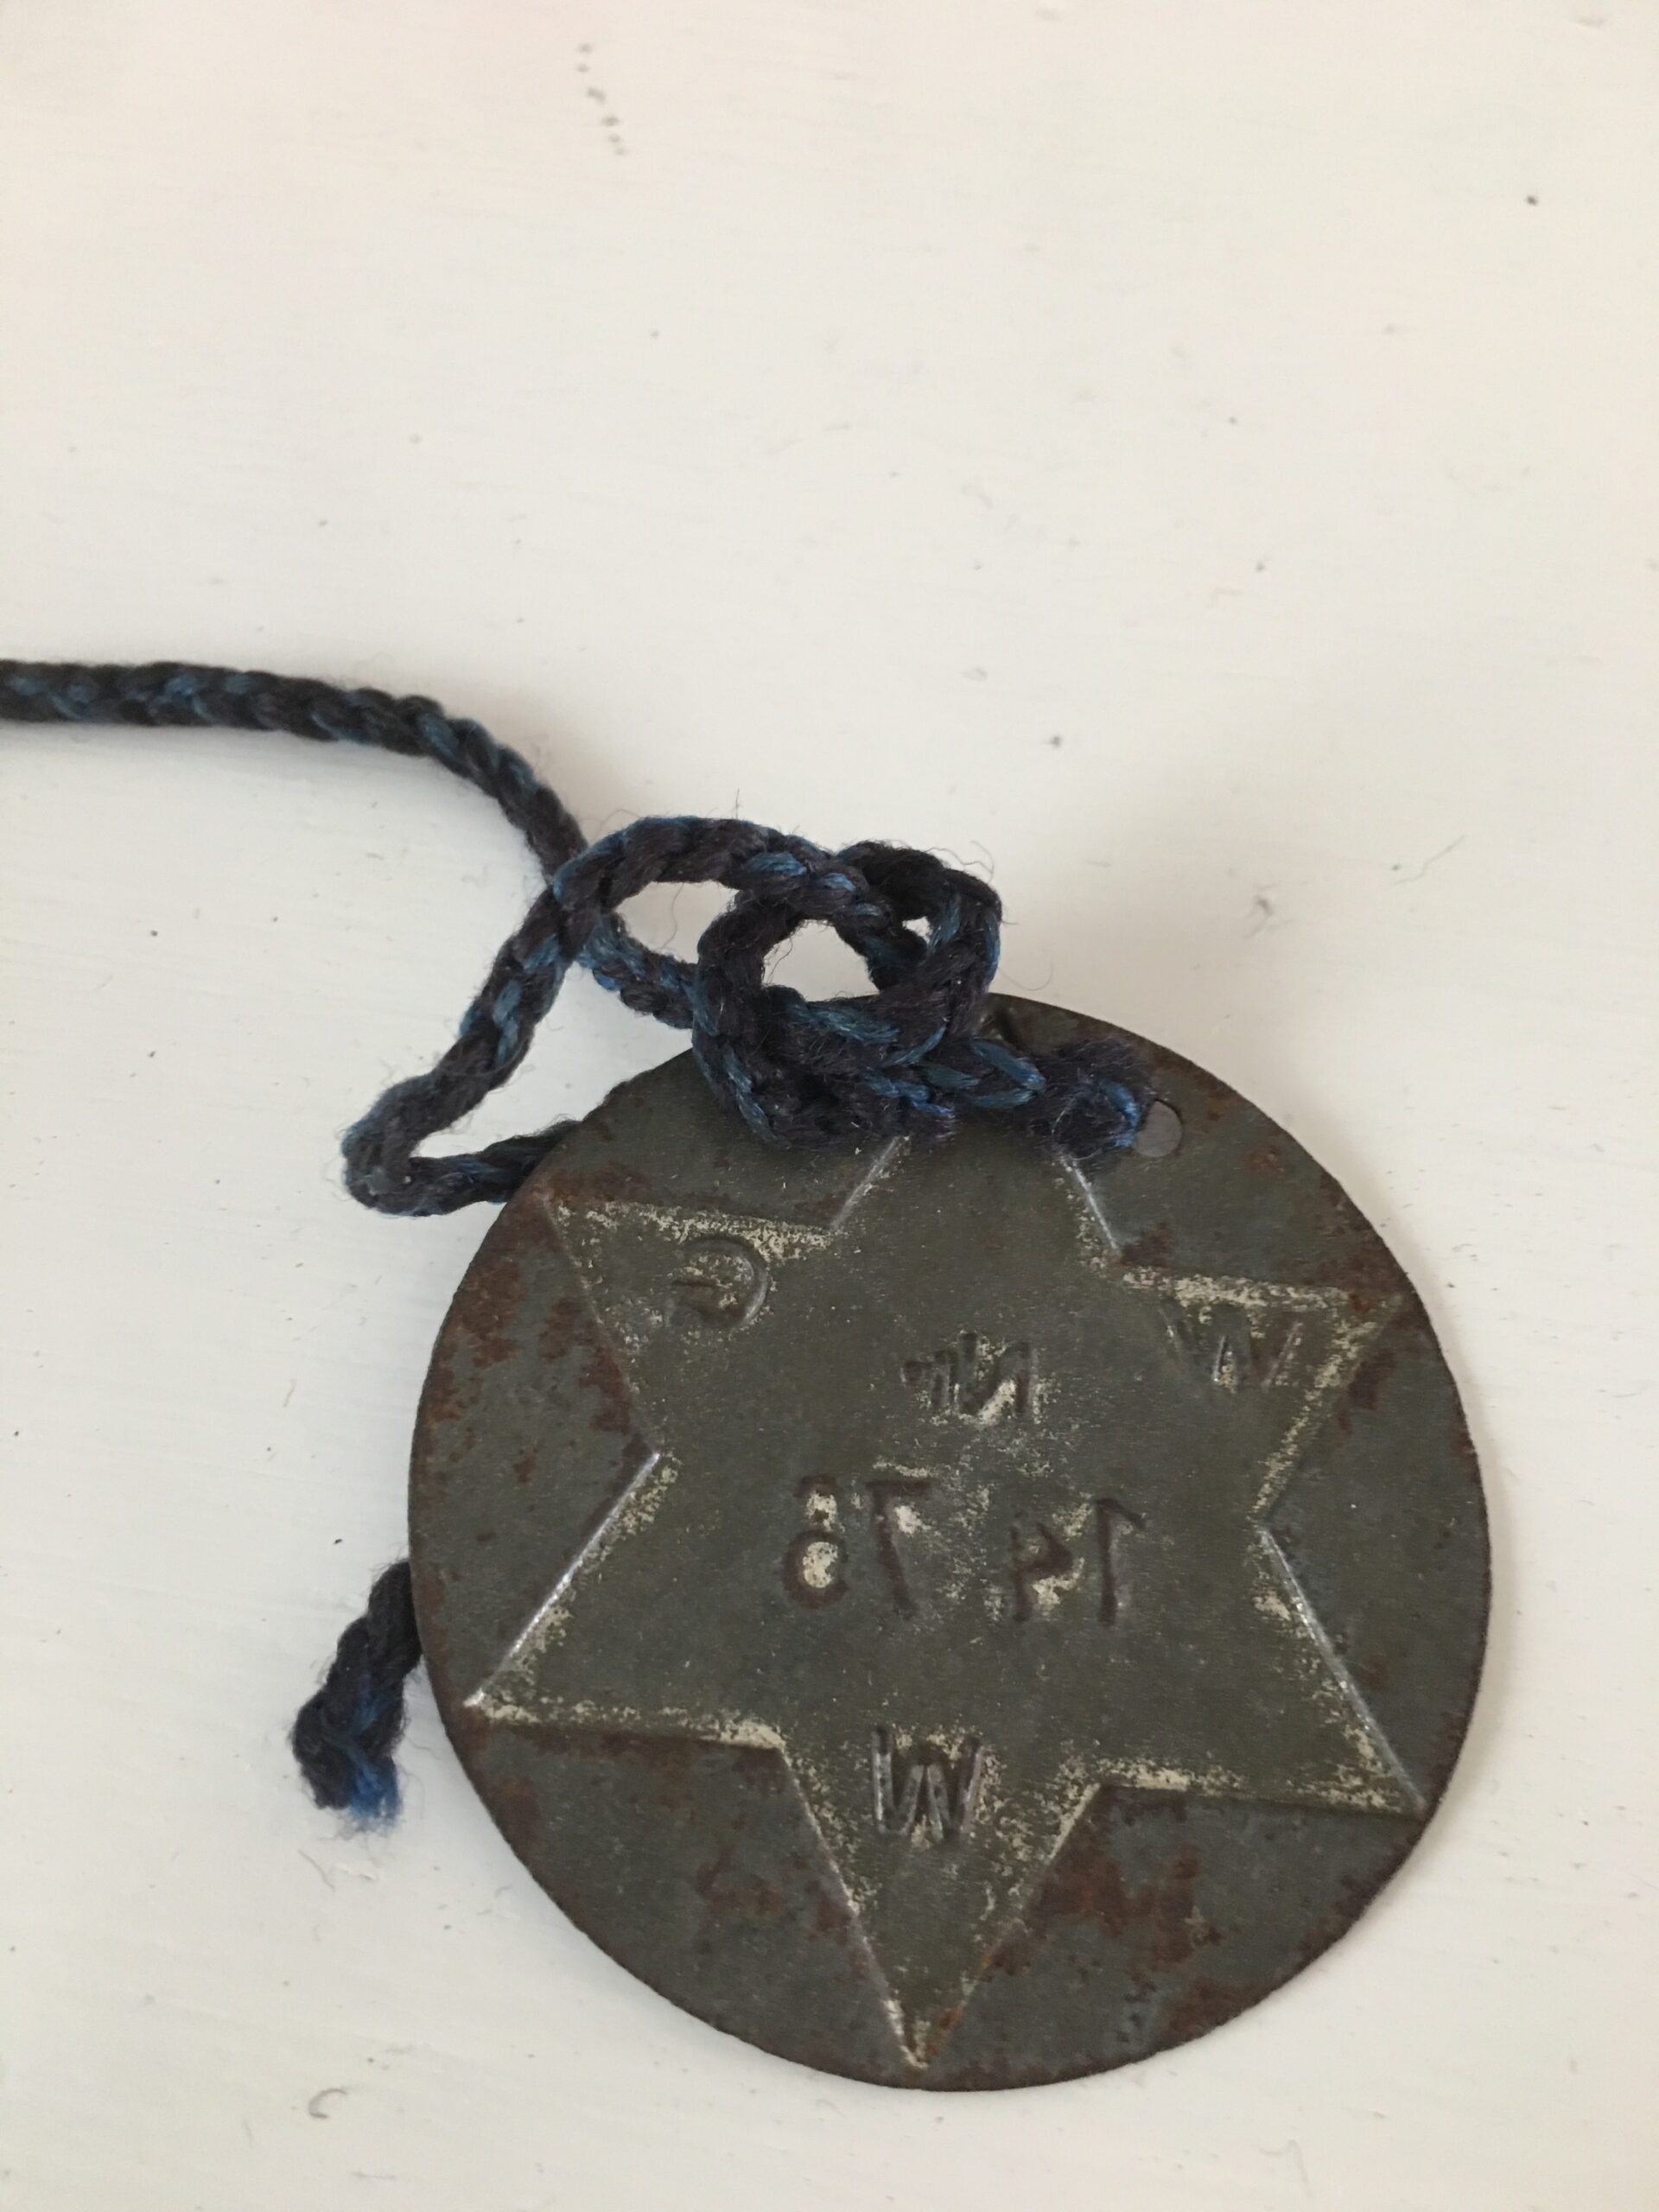 Suzanne Miller's mother had the gold Star of David she was required to wear during the war bronzed and turned into a piece of jewelry, which Miller wore on her visit to Auschwitz. SUZANNE MILLER